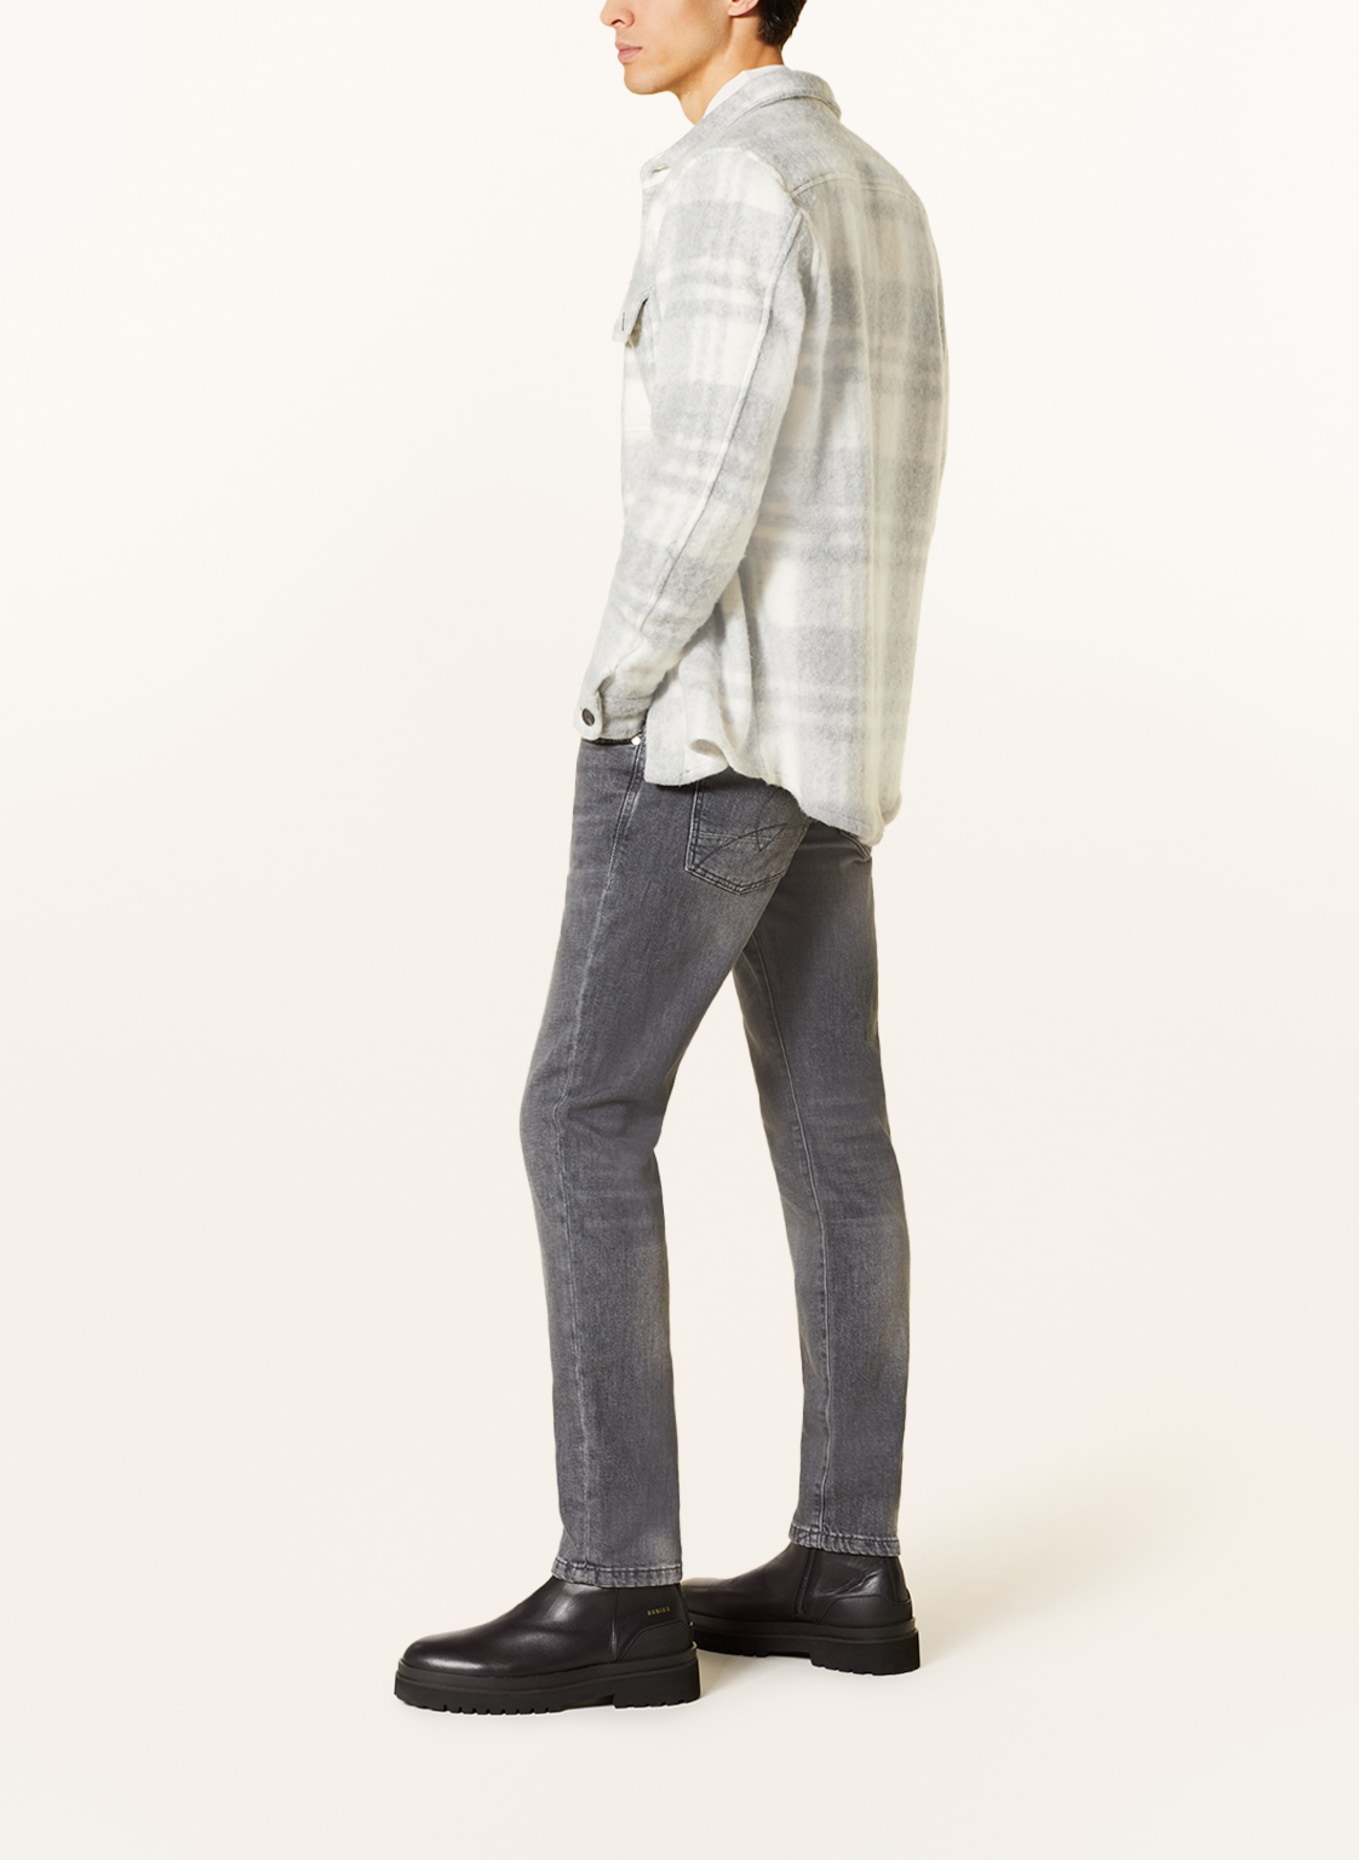 BALDESSARINI Jeans tapered fit, Color: 9834 grey used buffies (Image 4)